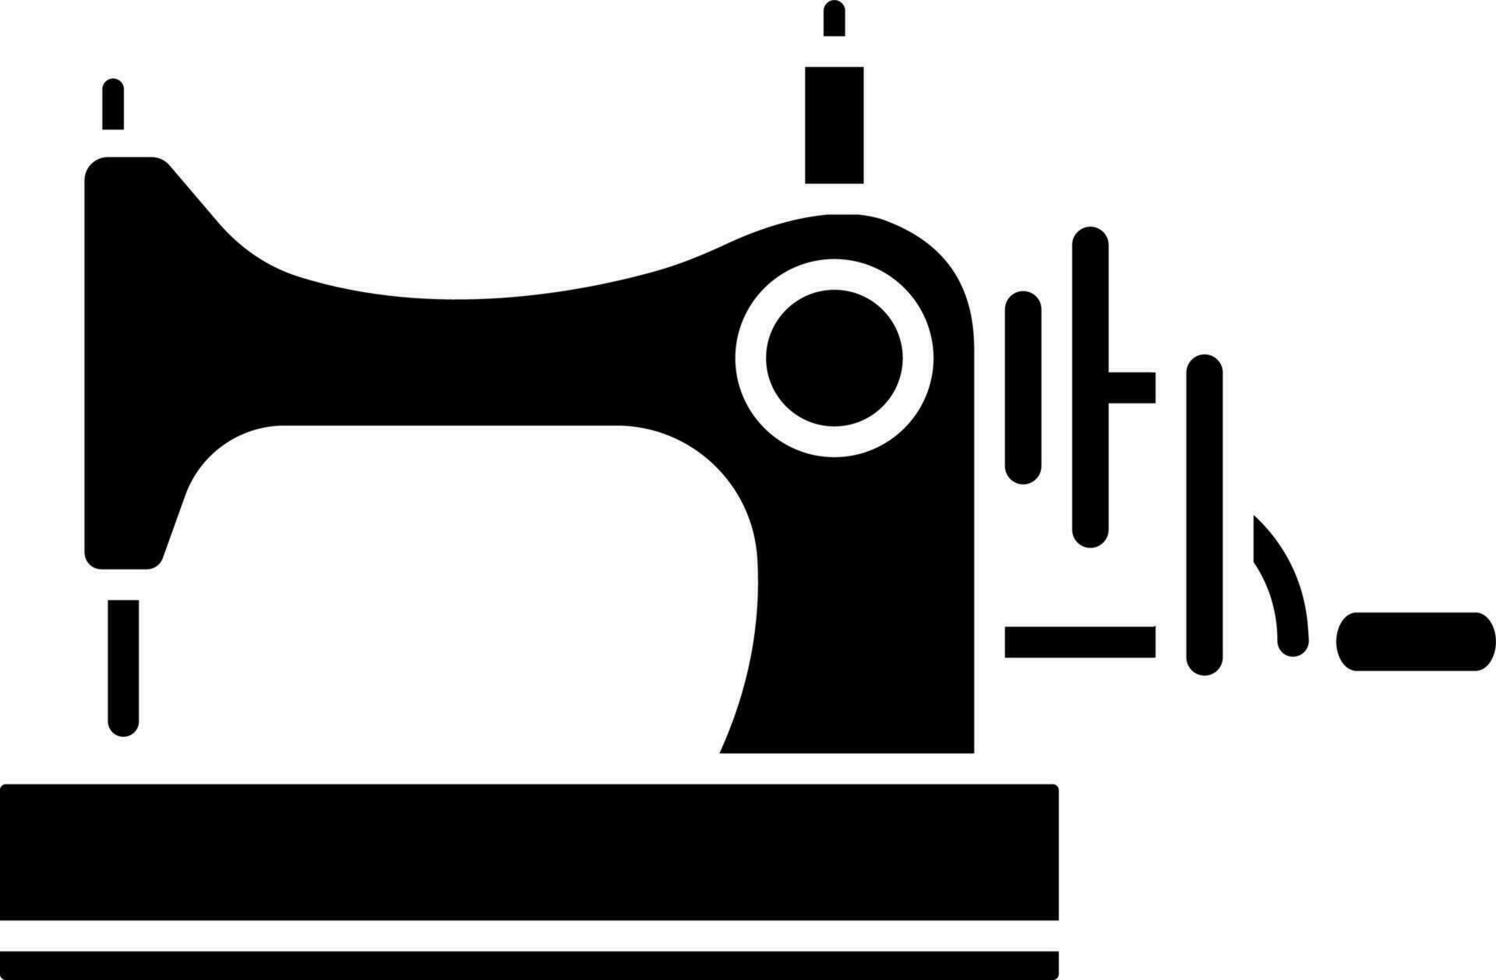 Black and White sewing machine icon or symbol. vector